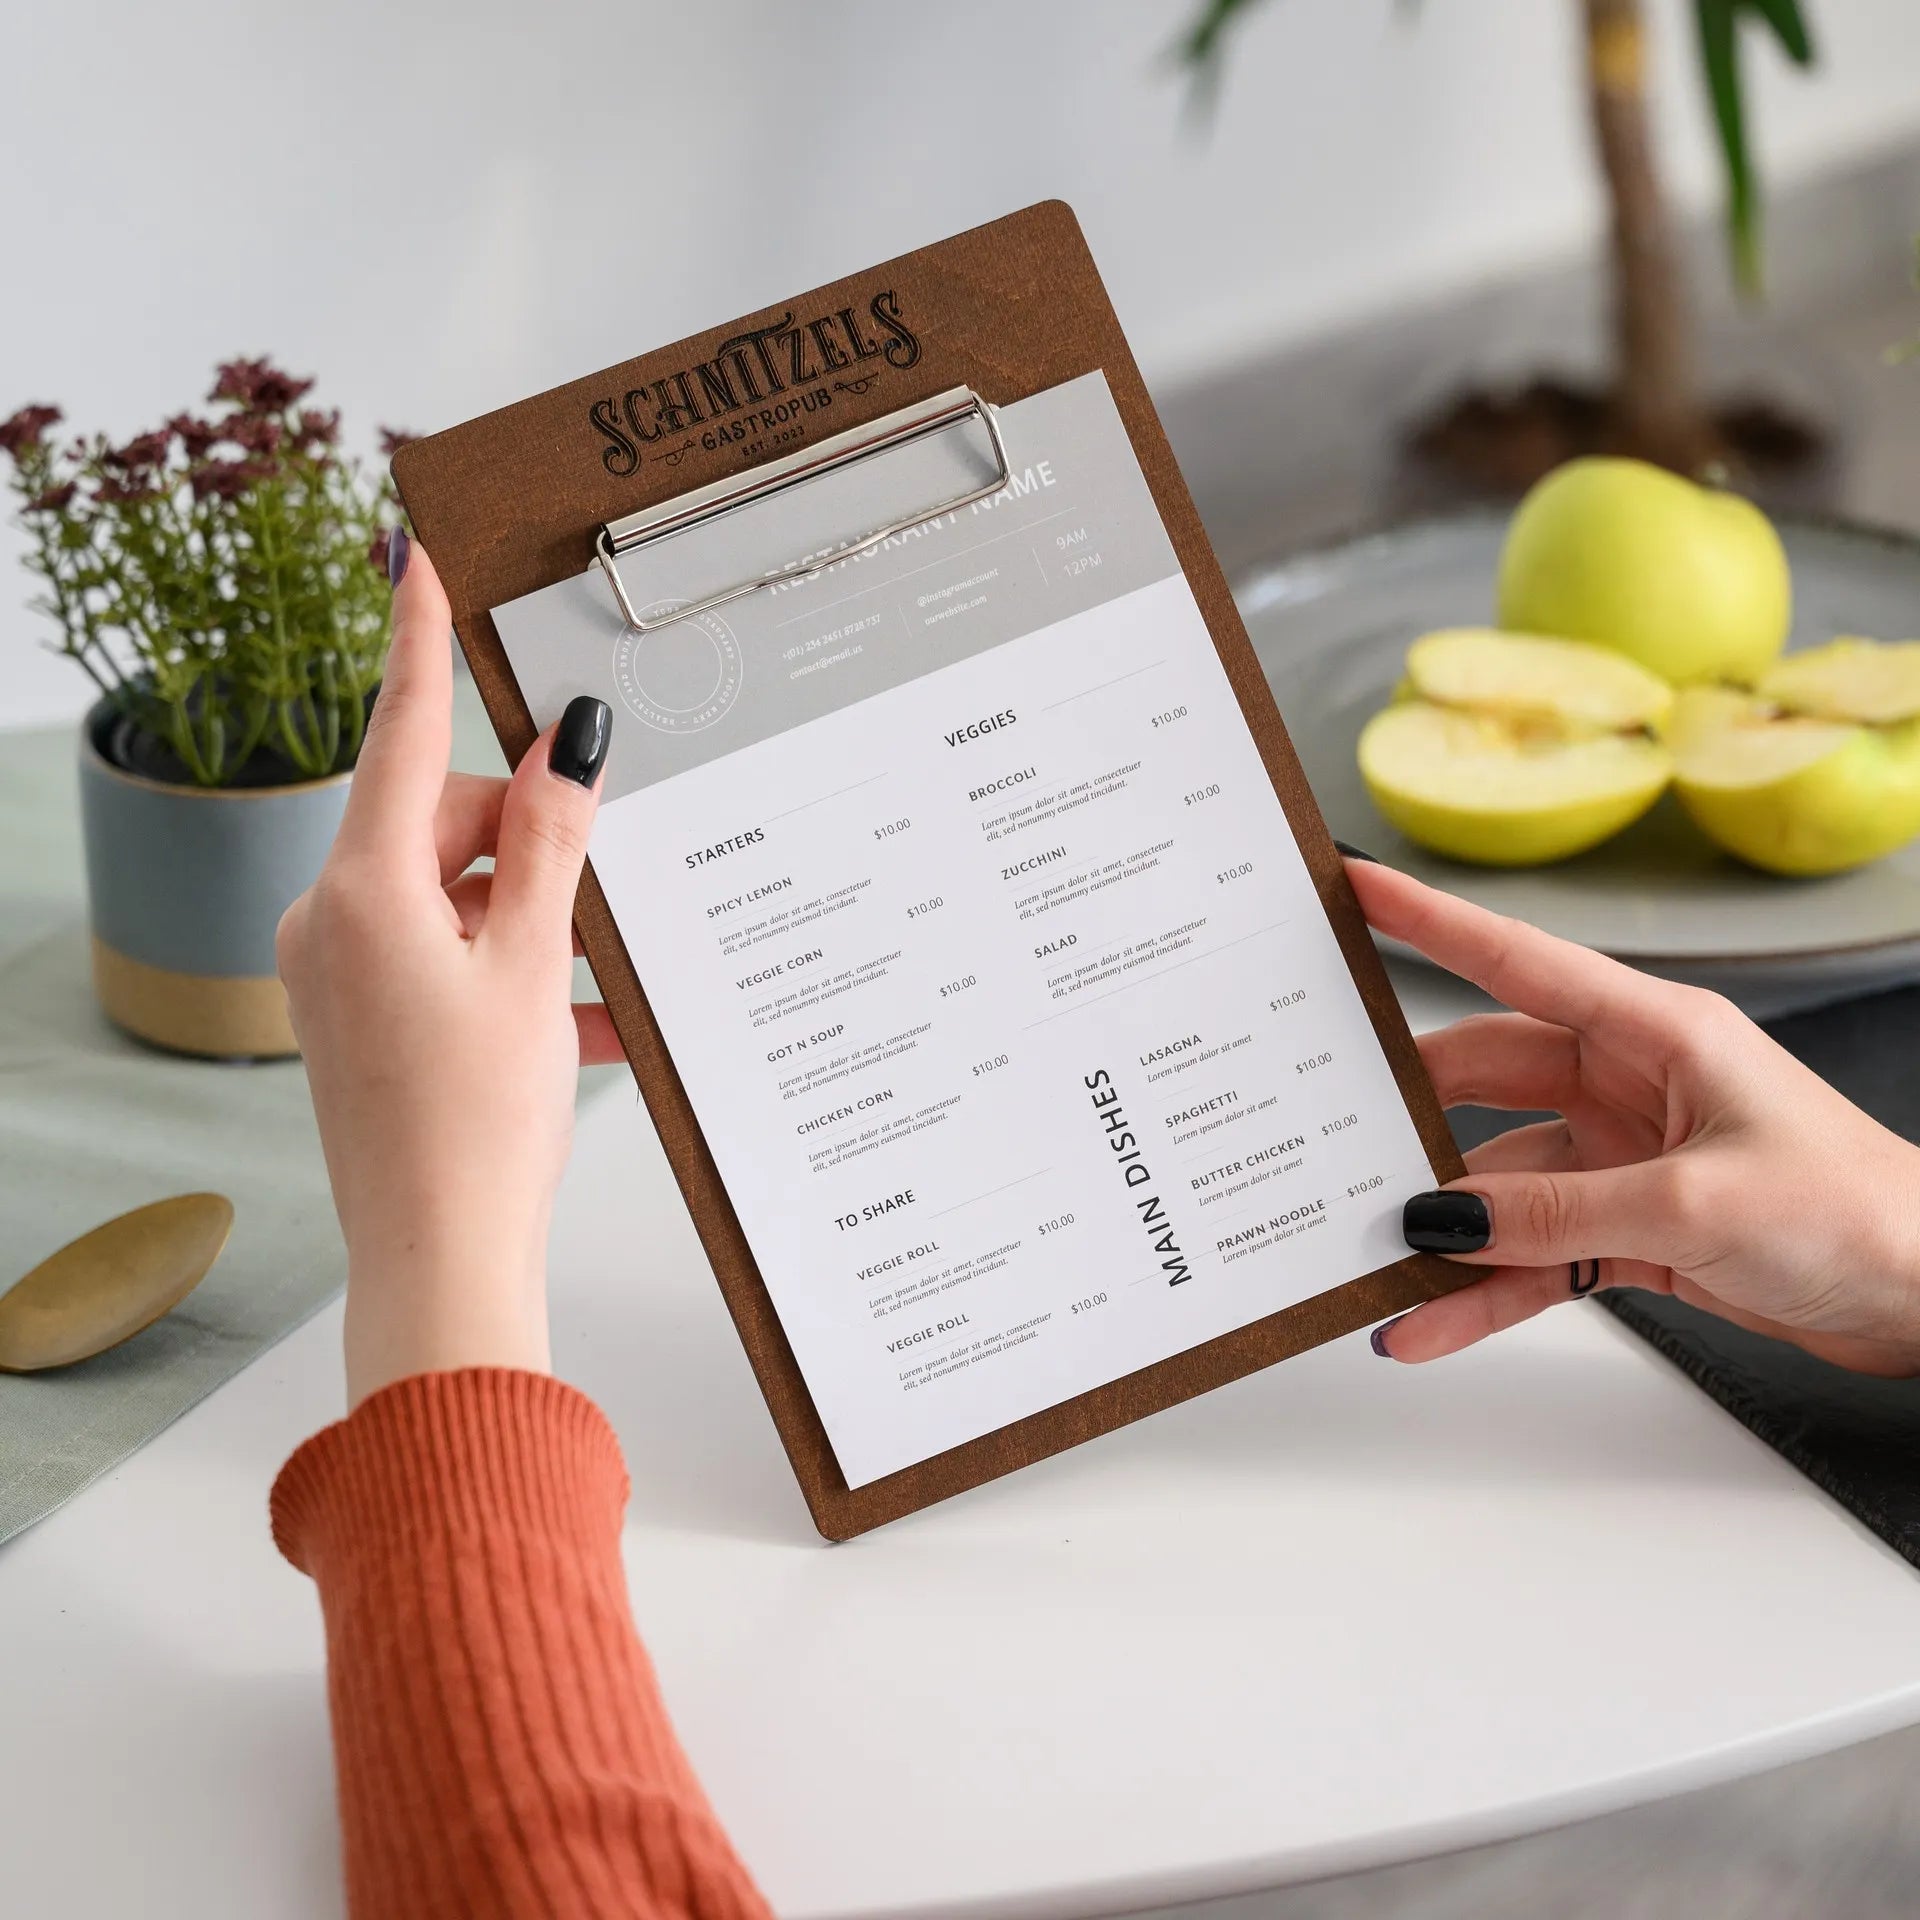 Wooden Clipboard Menu Holder: Combines rustic charm with functionality.